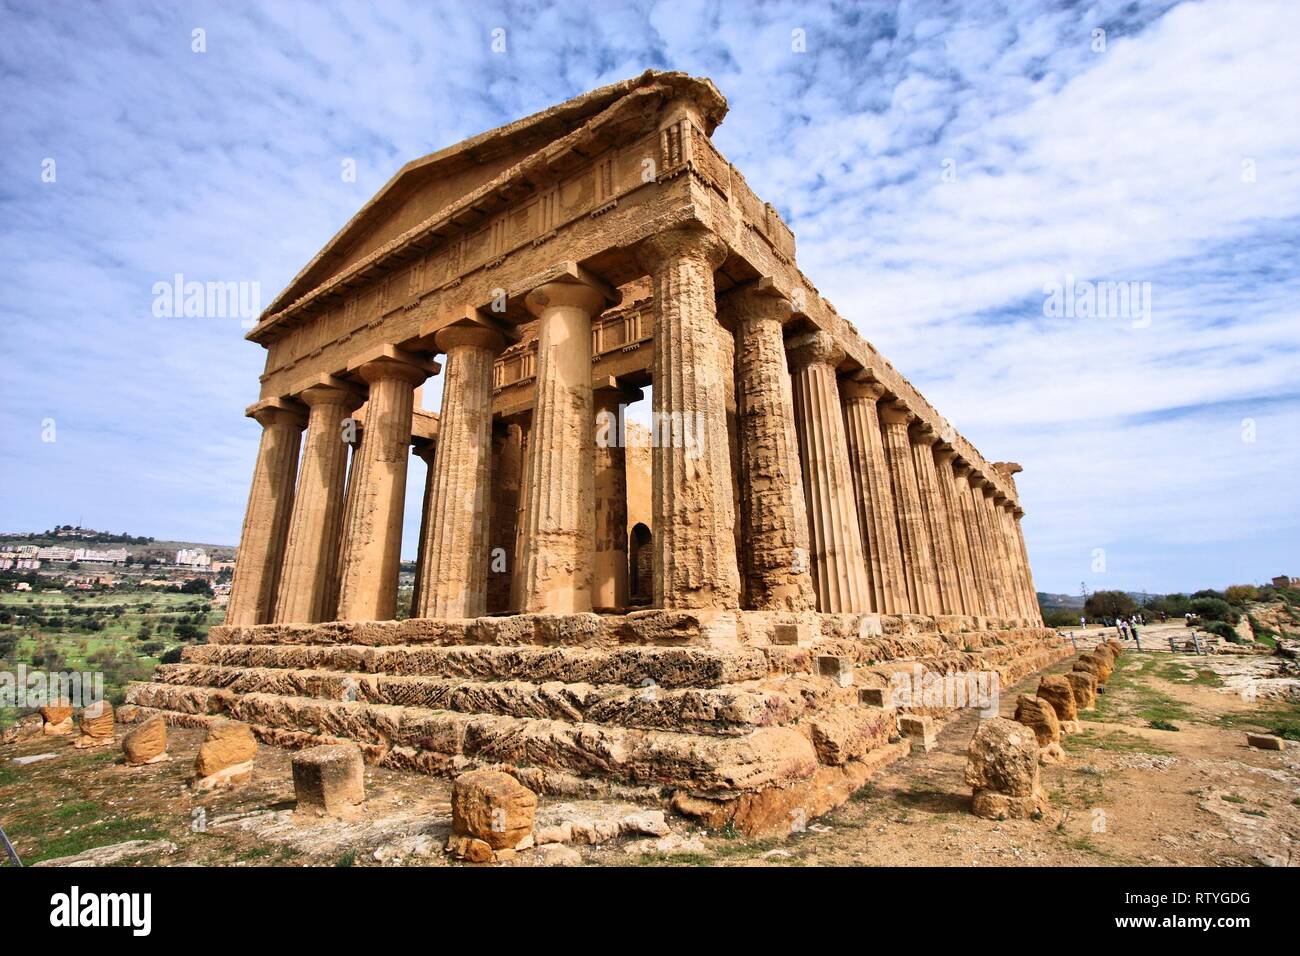 Agrigento, Sicily island in Italy. Famous Valle dei Templi, UNESCO World Heritage Site. Greek temple - remains of the Temple of Concordia. Stock Photo